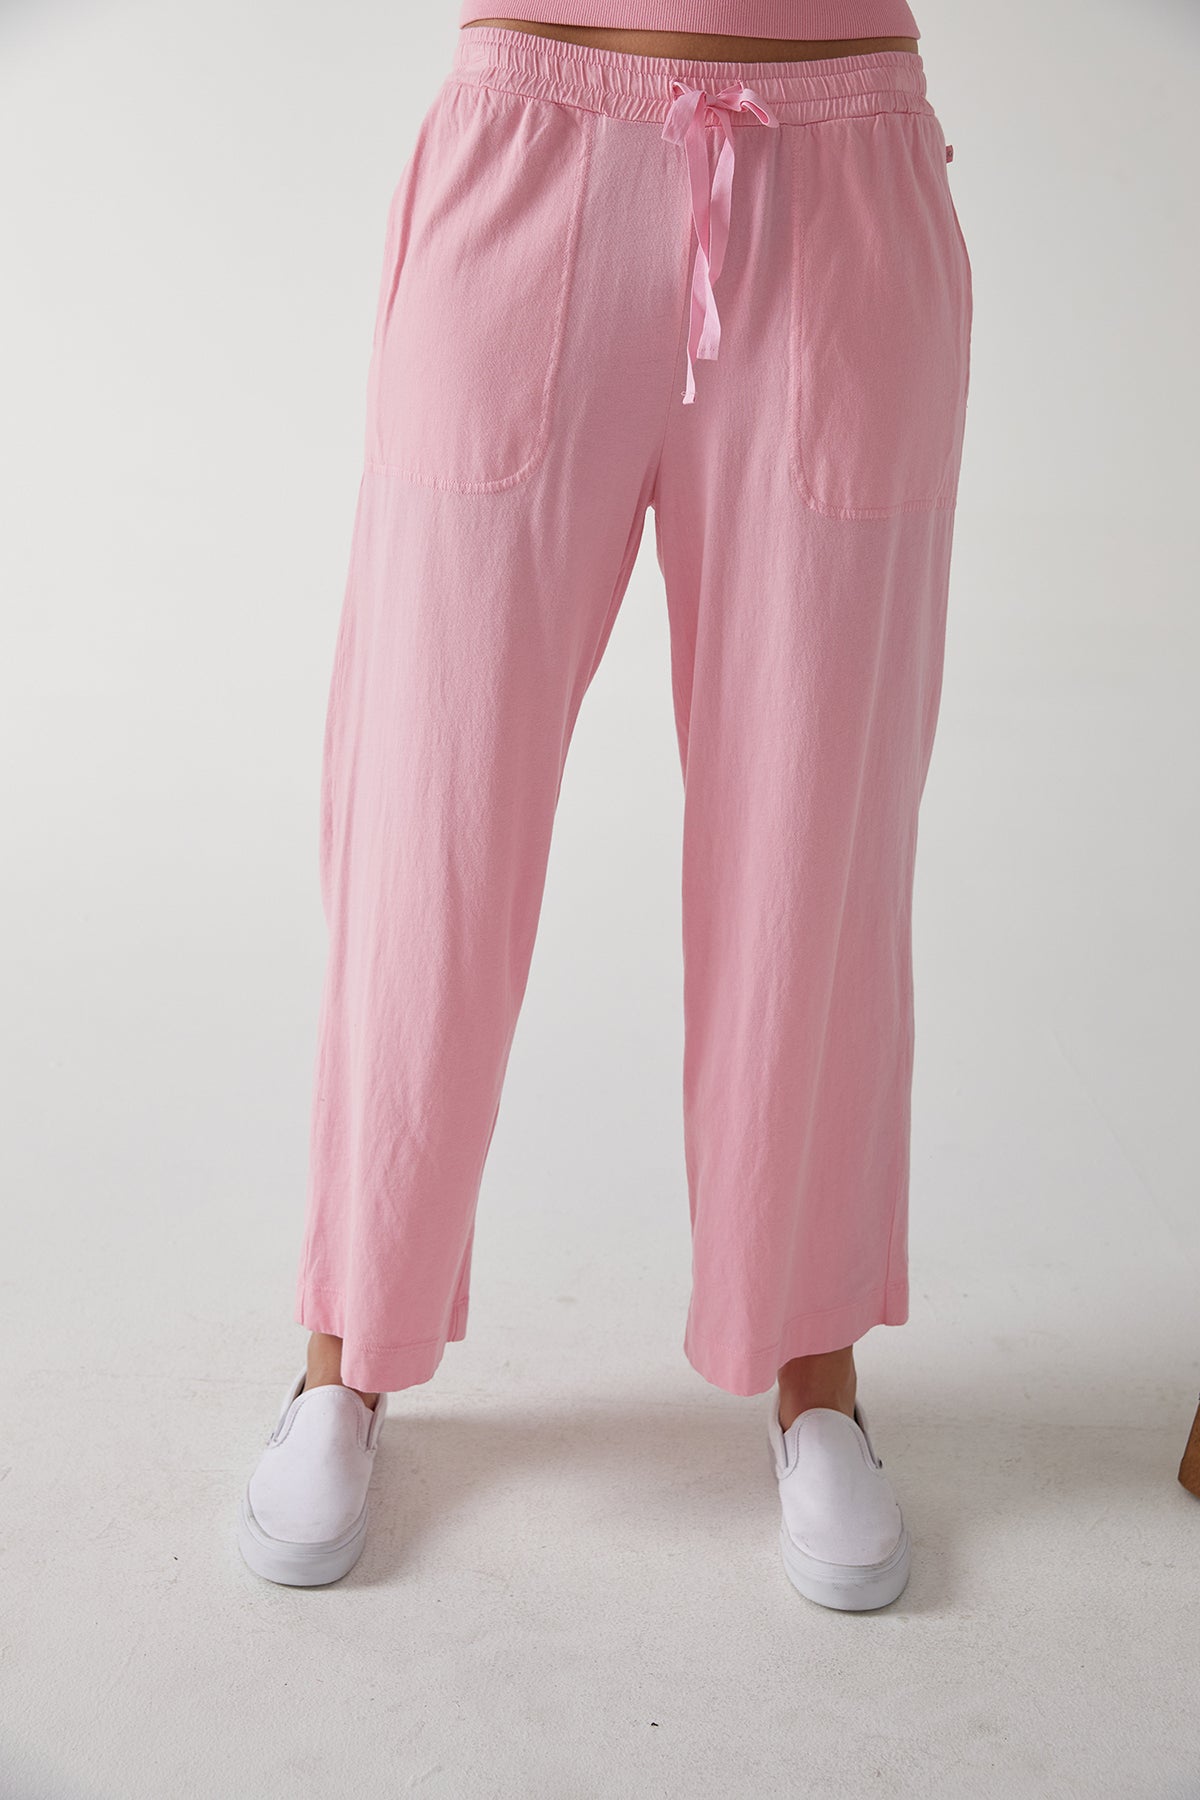 Buy Baby Pink Palazzo Pant Cotton for Best Price, Reviews, Free